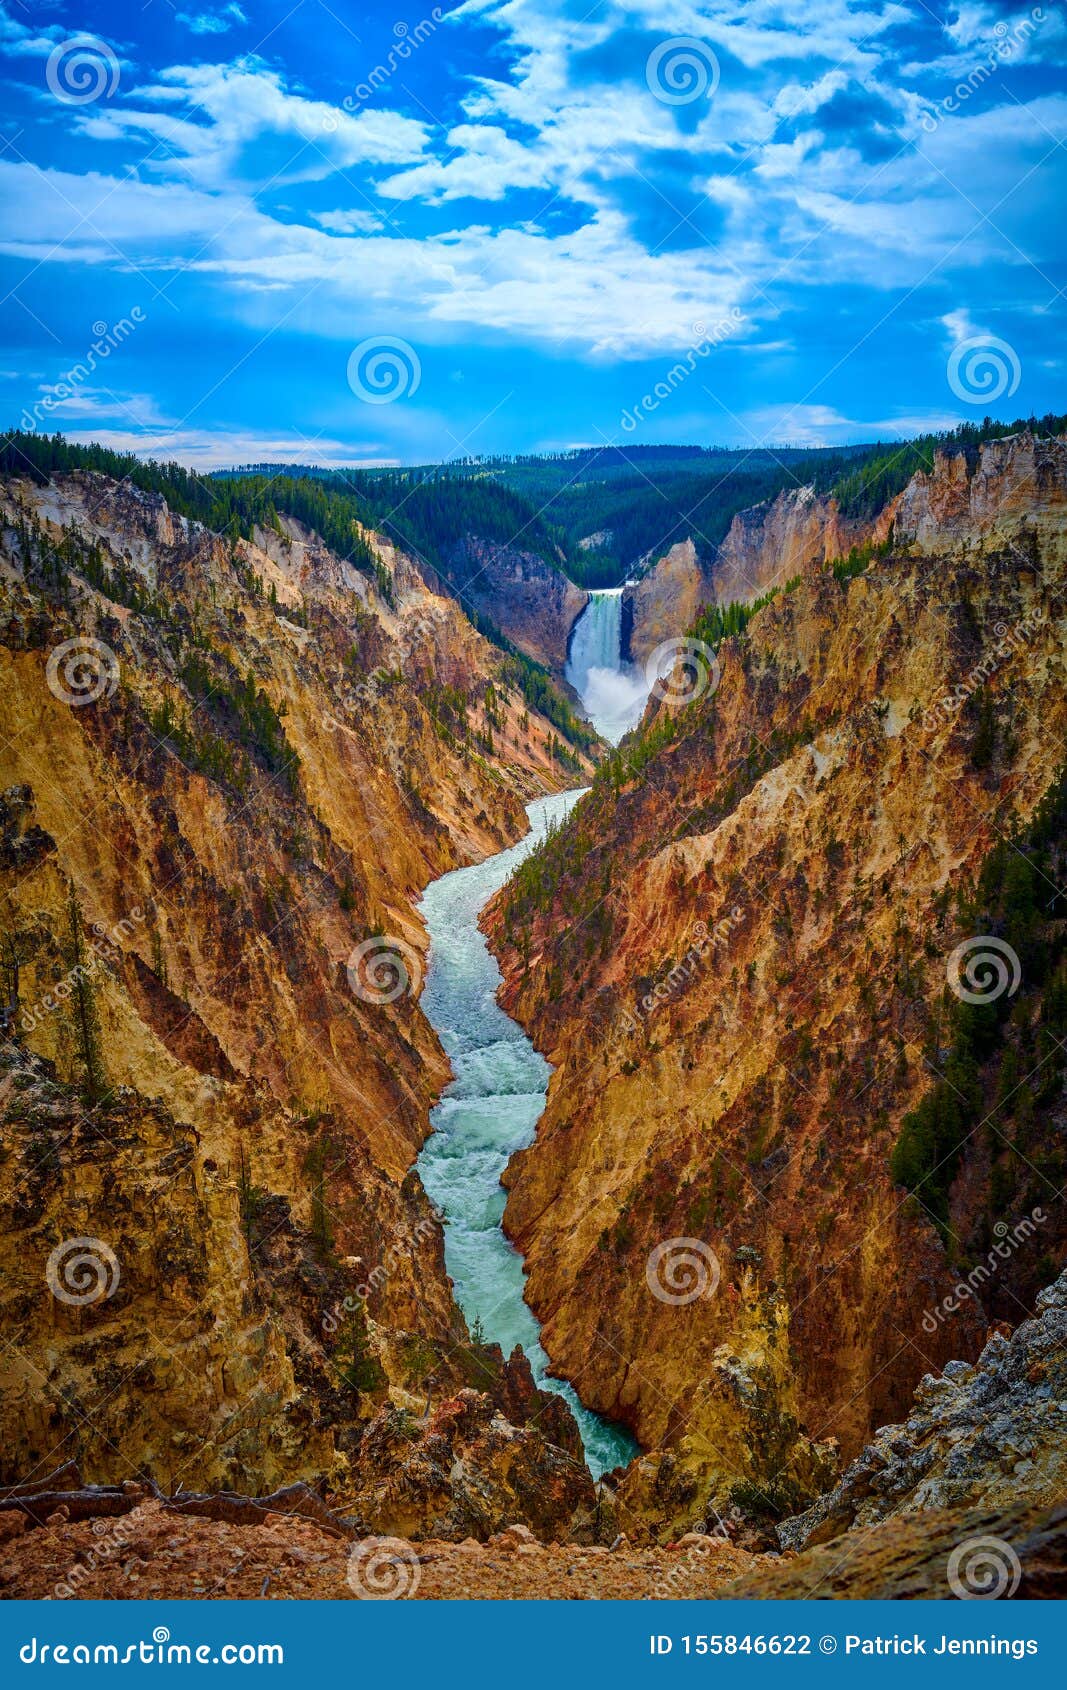 veiw of lower yellowstone falls and the grand canyon of the yellowstone at yellowstone national park, wyoming, usa